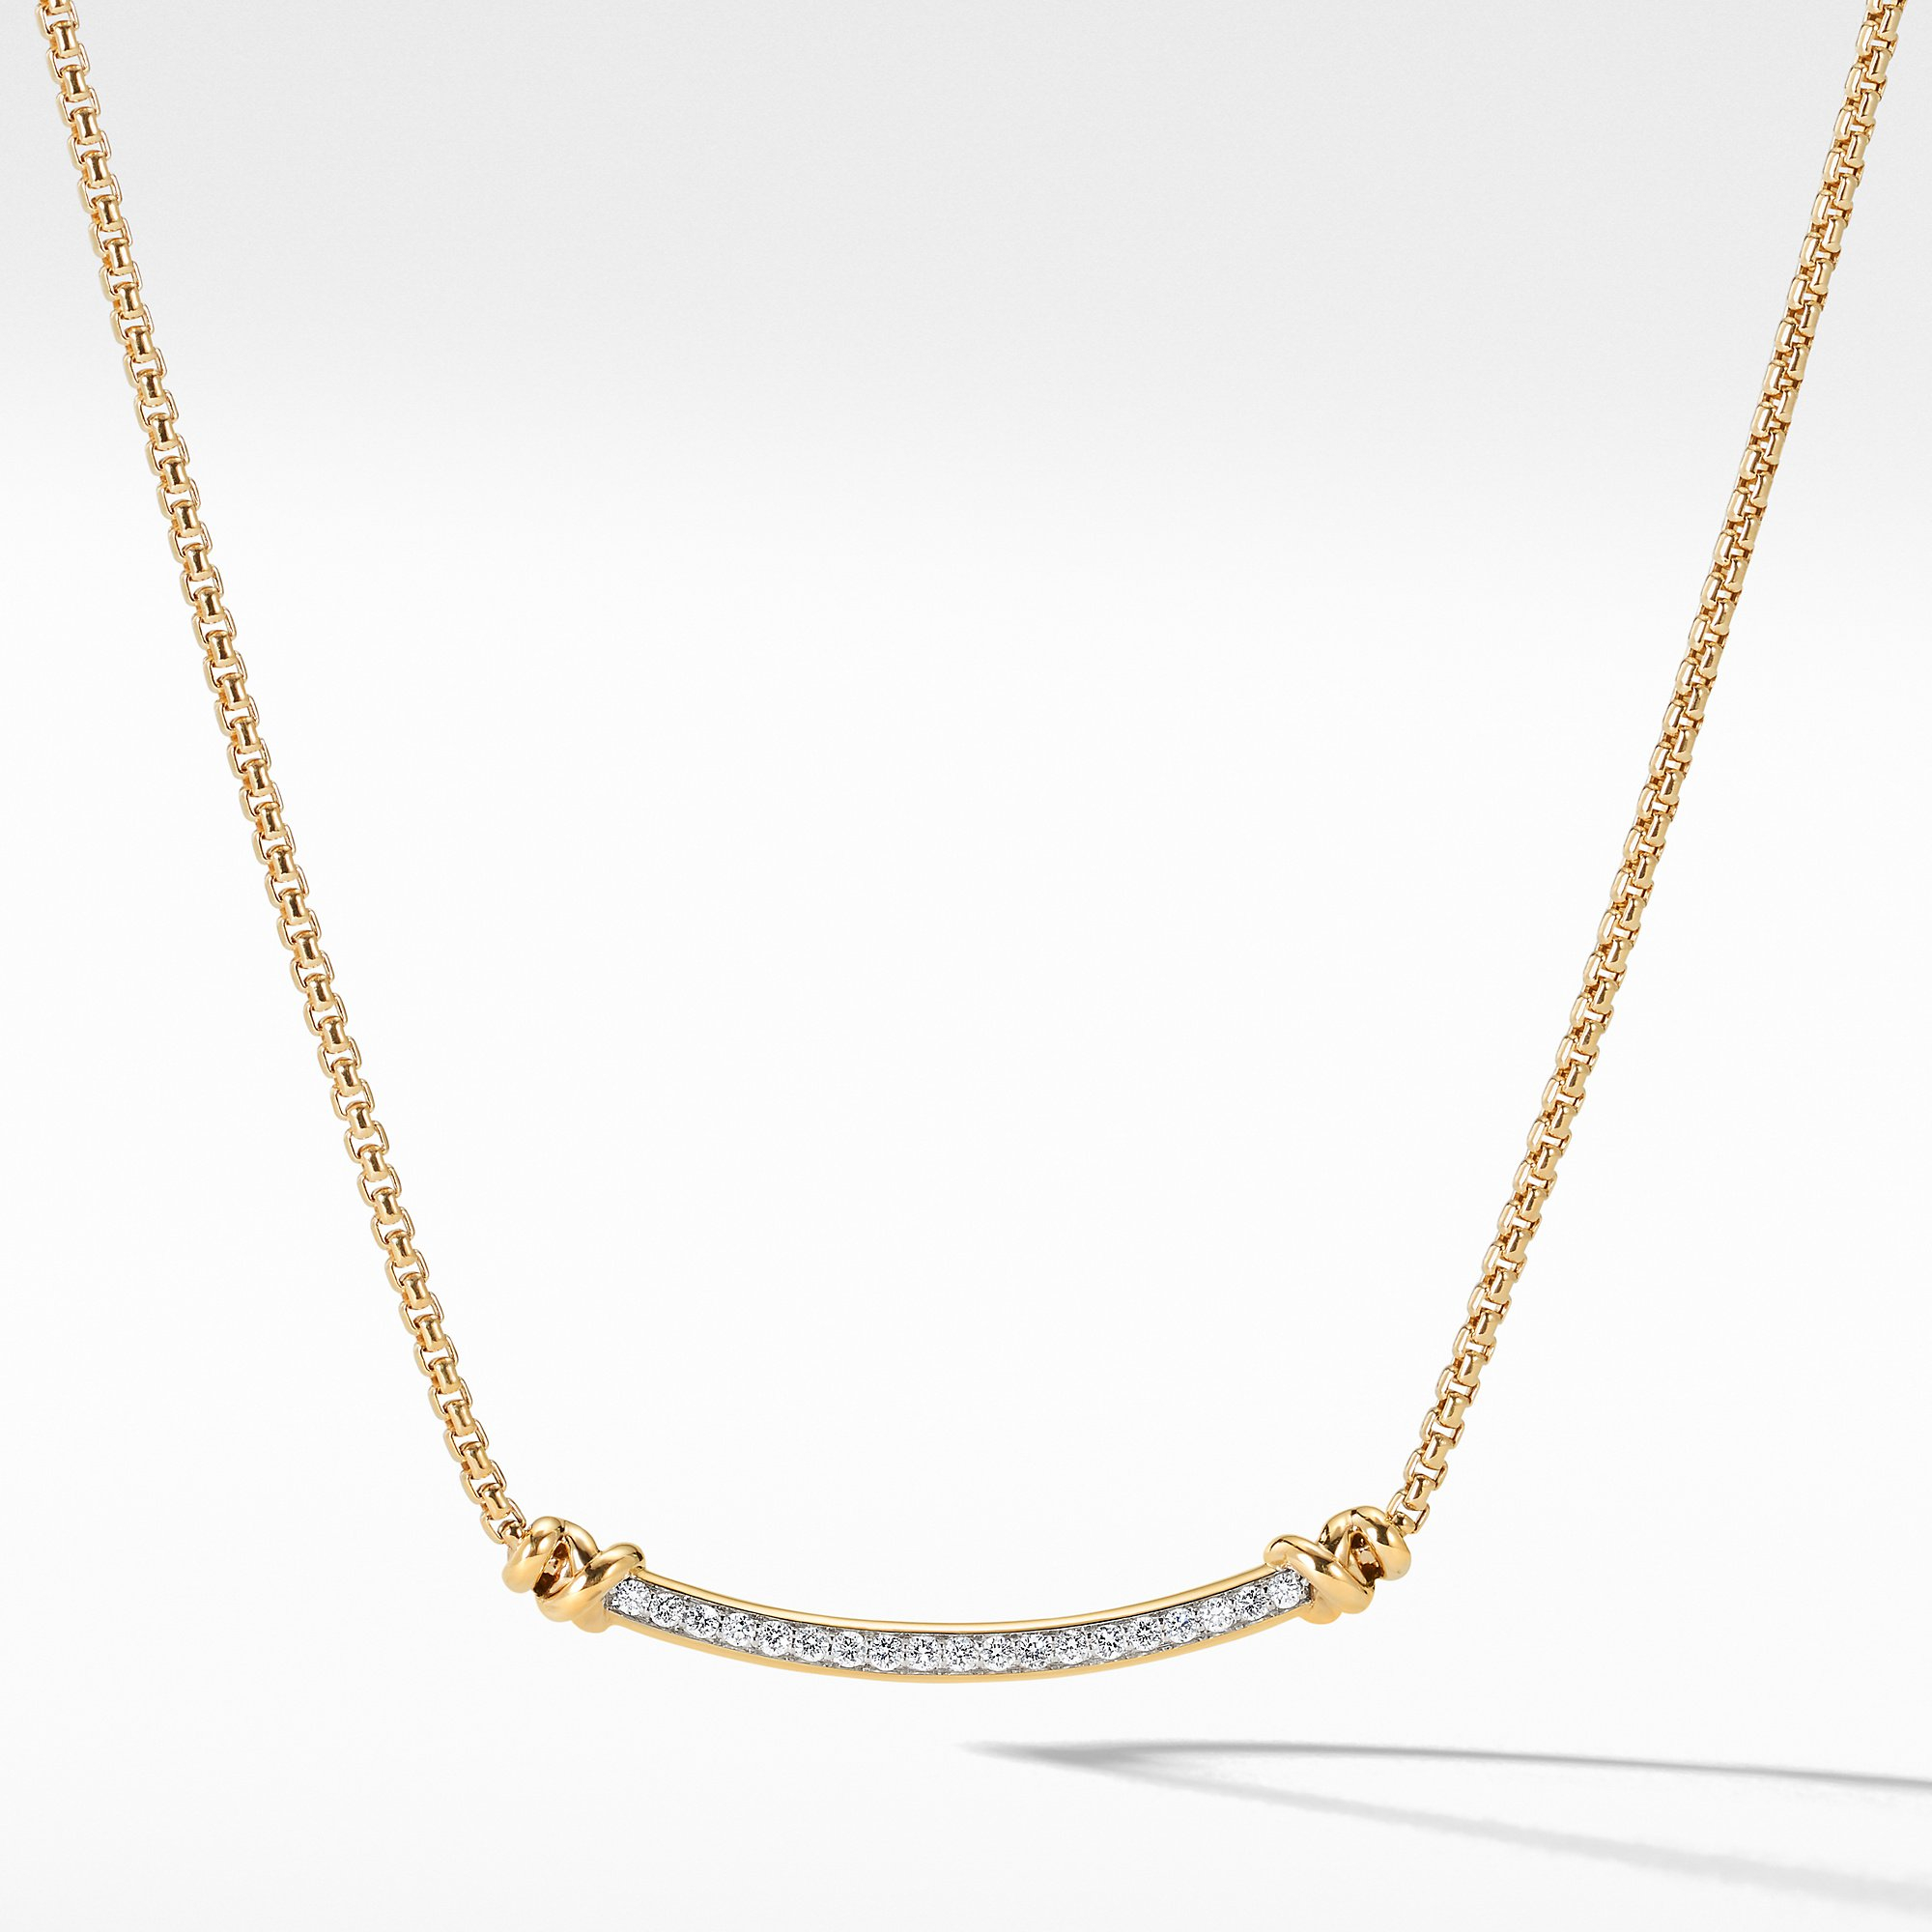 Helena Lee Michaels in 18k Bar Yurman with David | stores Diamonds Necklace Yellow Petite Curved Gold Fine Jewelry